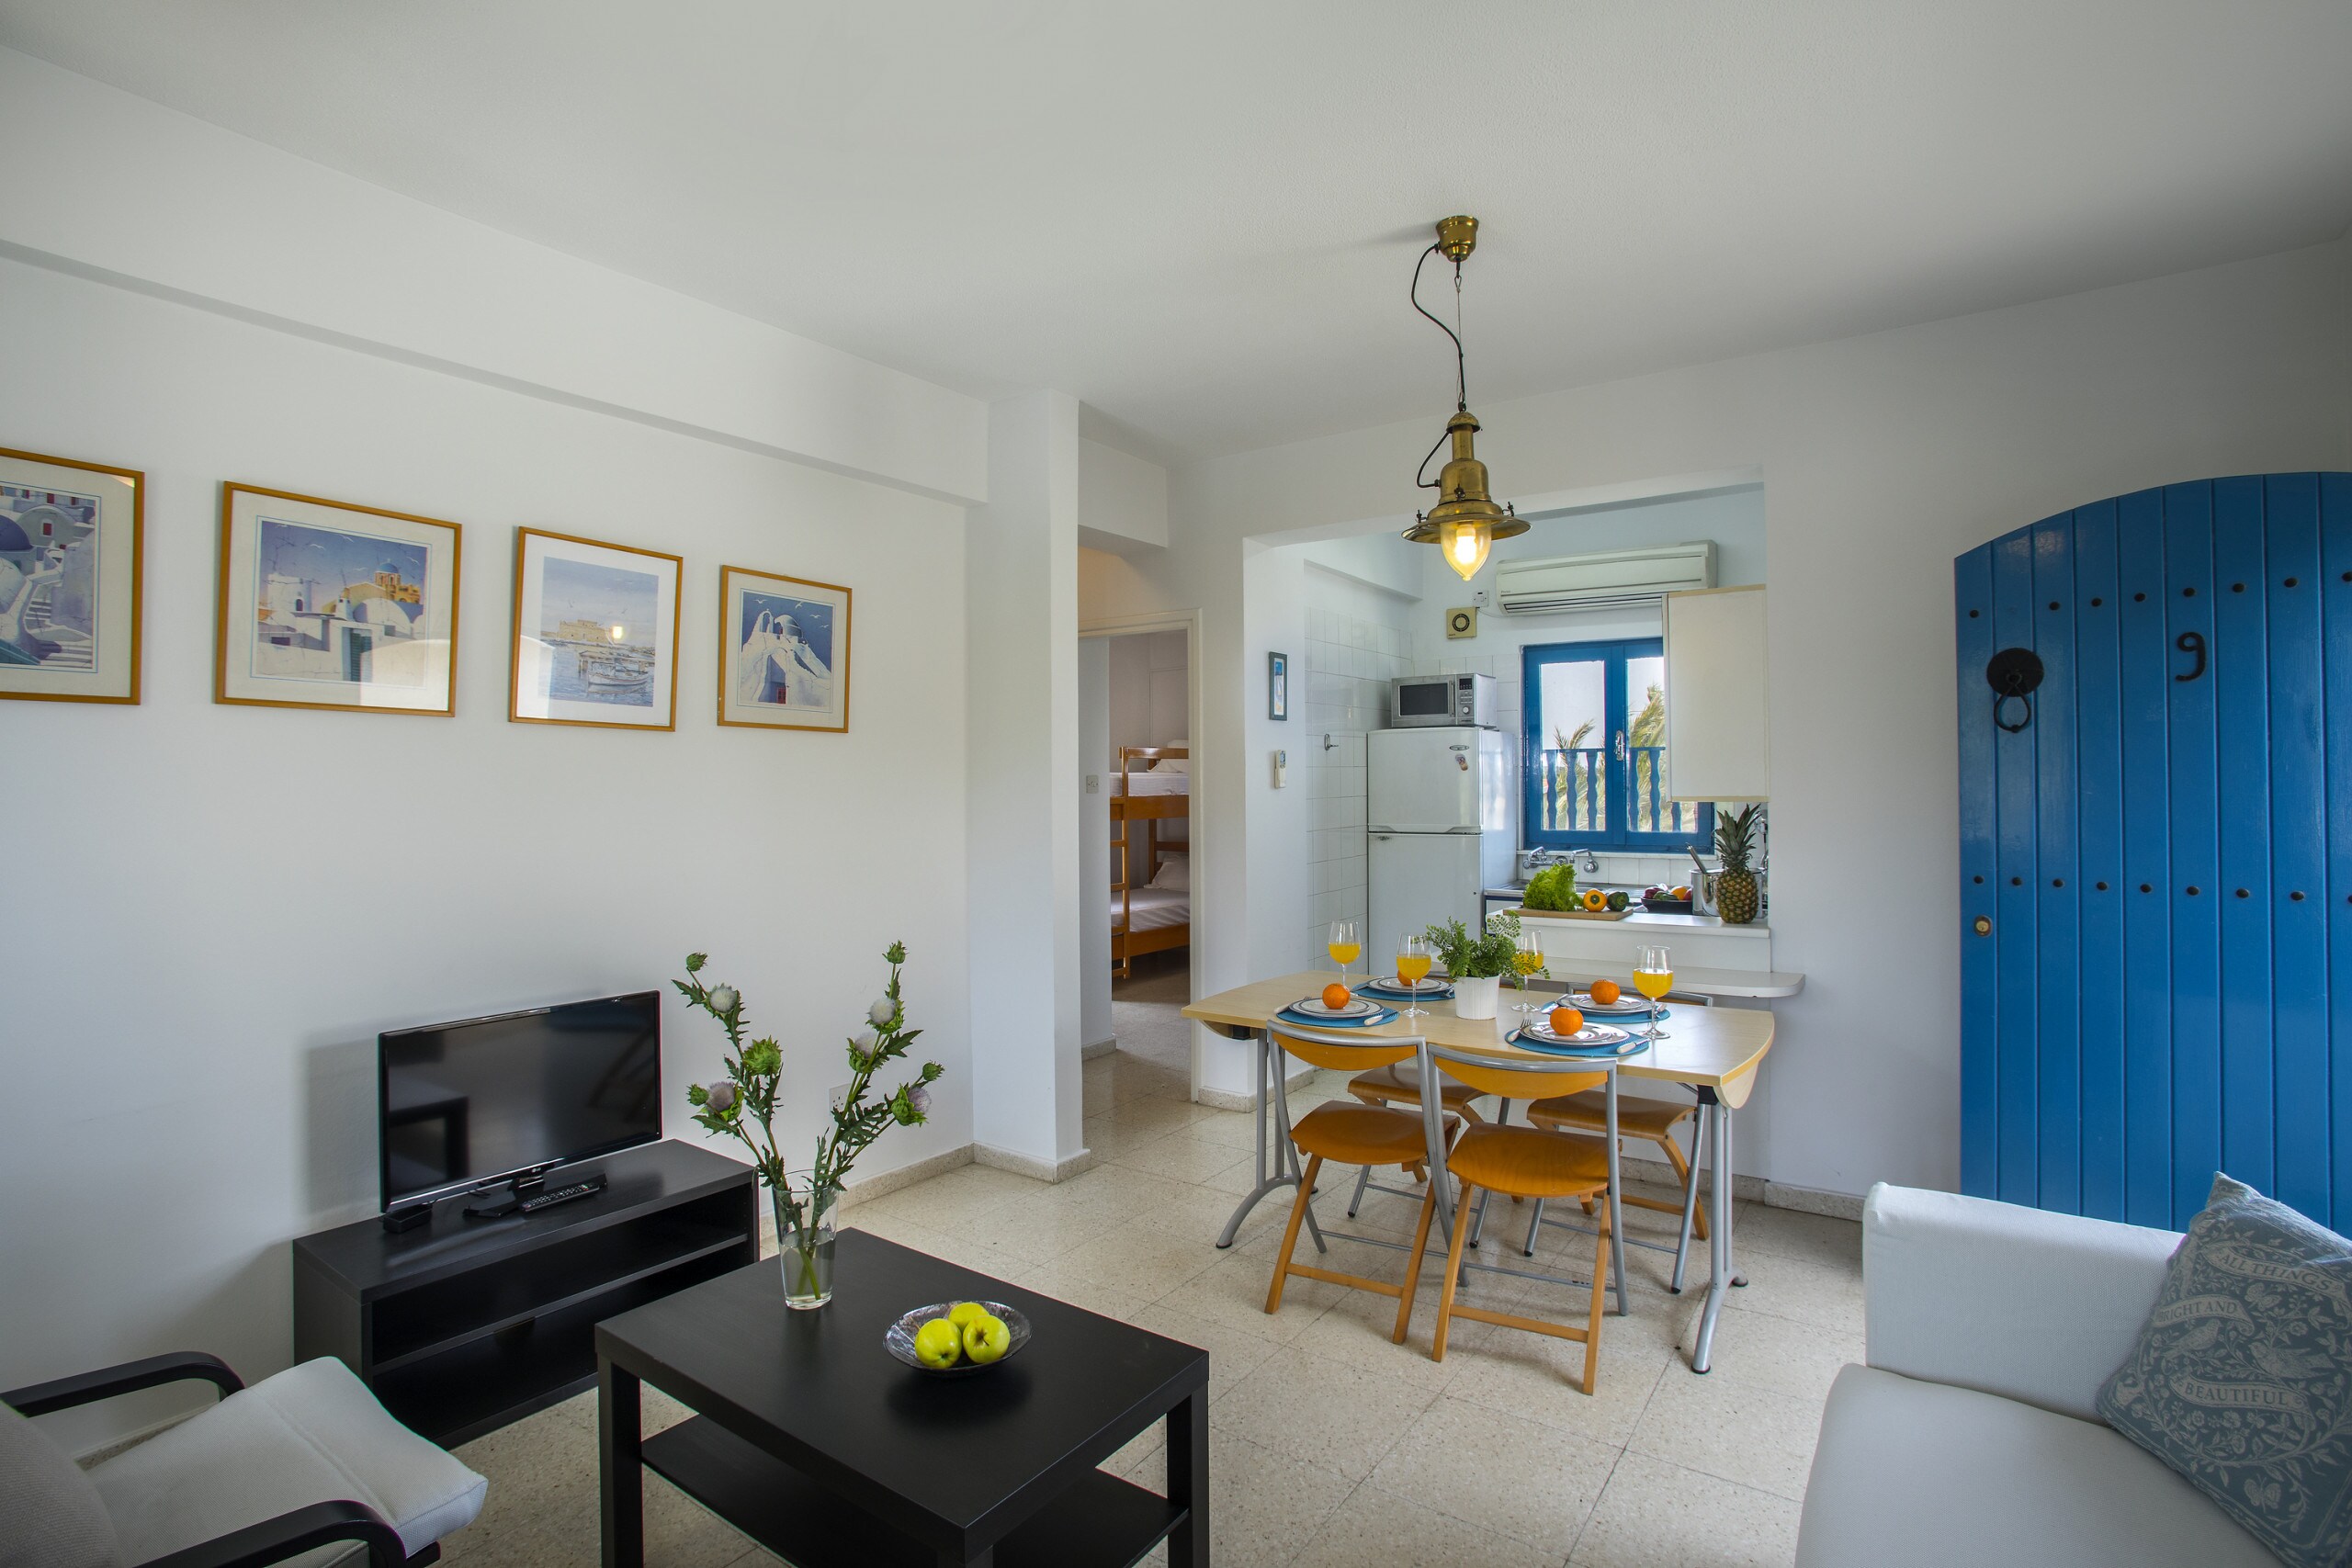 Property Image 2 - Bright Greek Island Style Apartment with a View